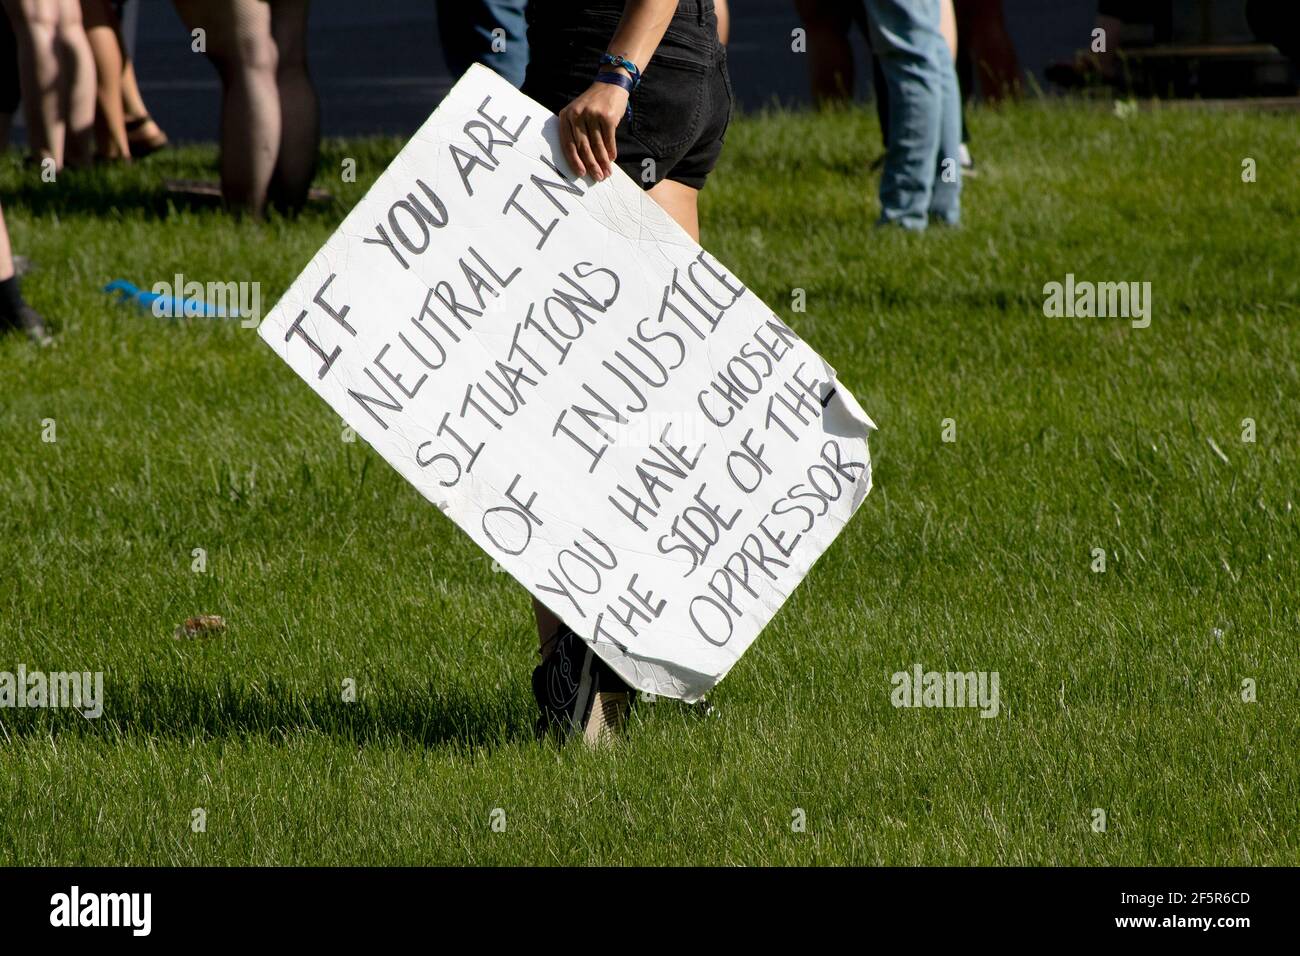 White hand holding poster made for peaceful protest about social justice Stock Photo